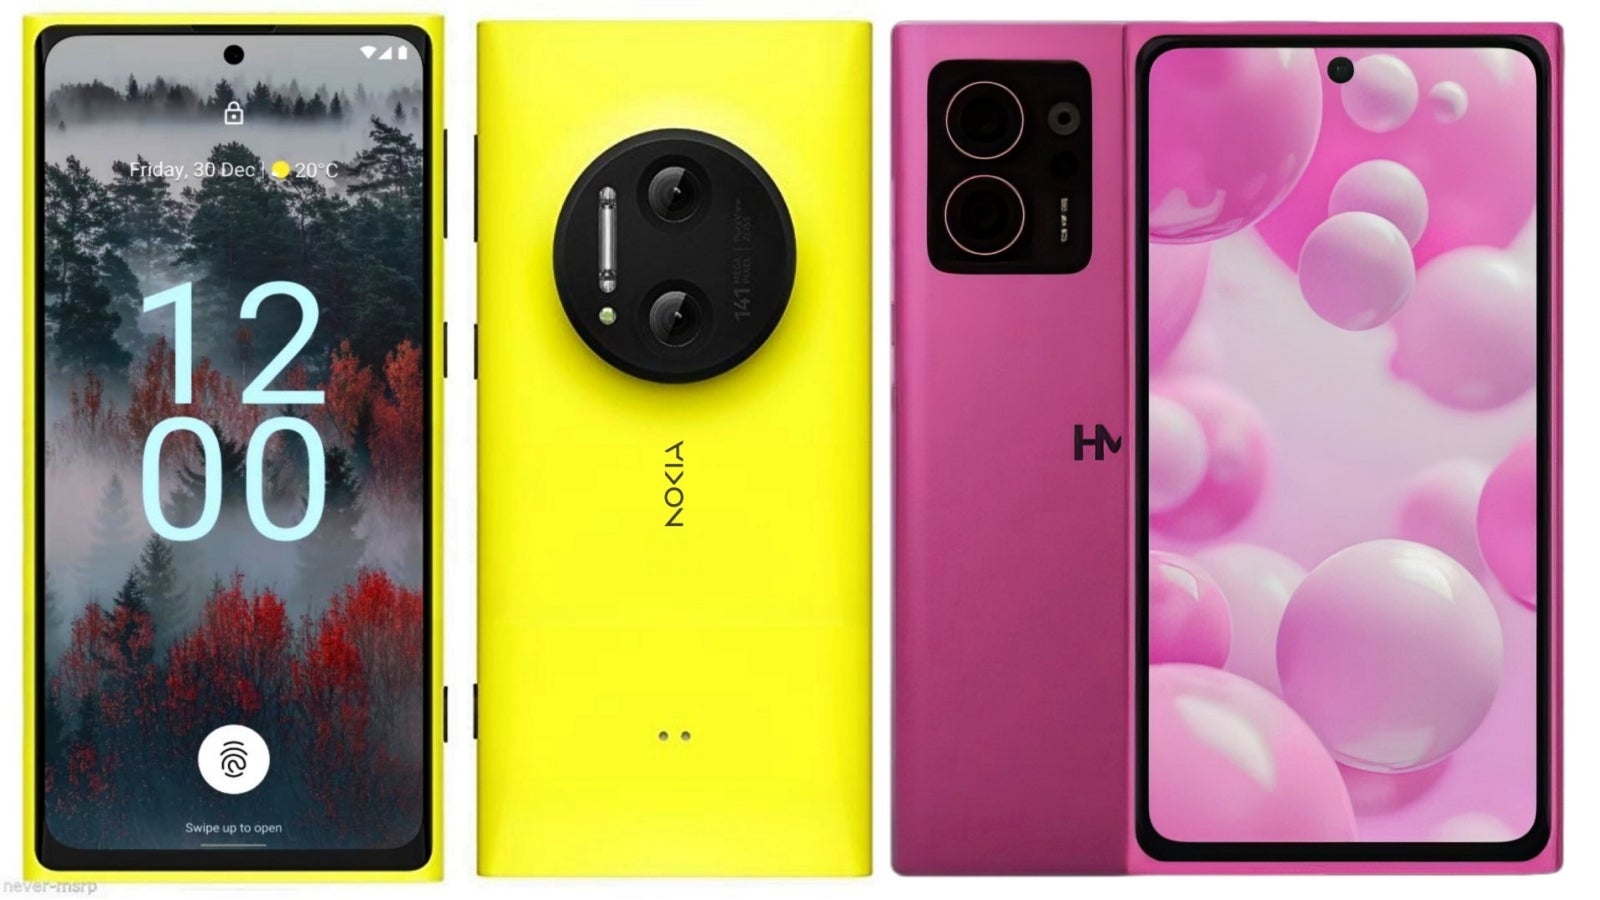 On the left, a fan-made, “futuristic Nokia Lumia” render from February 2023. On the right is a leaked render of HMD’s supposed mid-range phone for 2024. - Comeback! 2024 “Nokia Lumia” has a modern design and Android, but is HMD 10 years late?